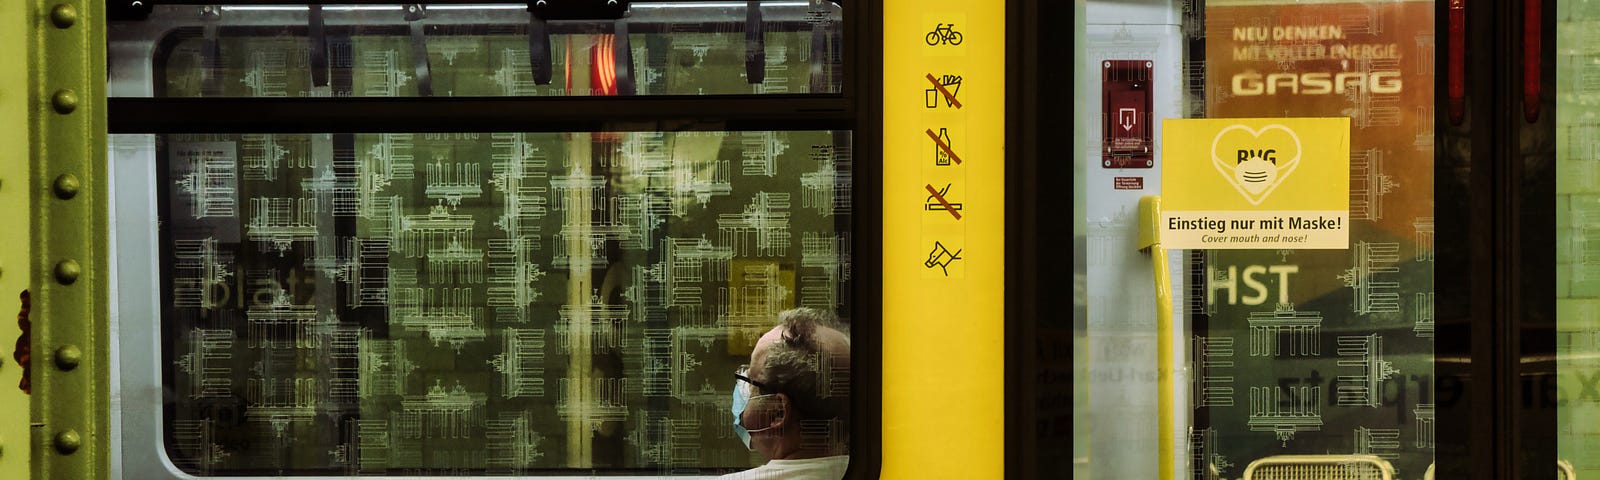 A yellow train from the outside with a sign showing that it is only allowed to enter with a mask. A man sits inside the train, wearing a mask.